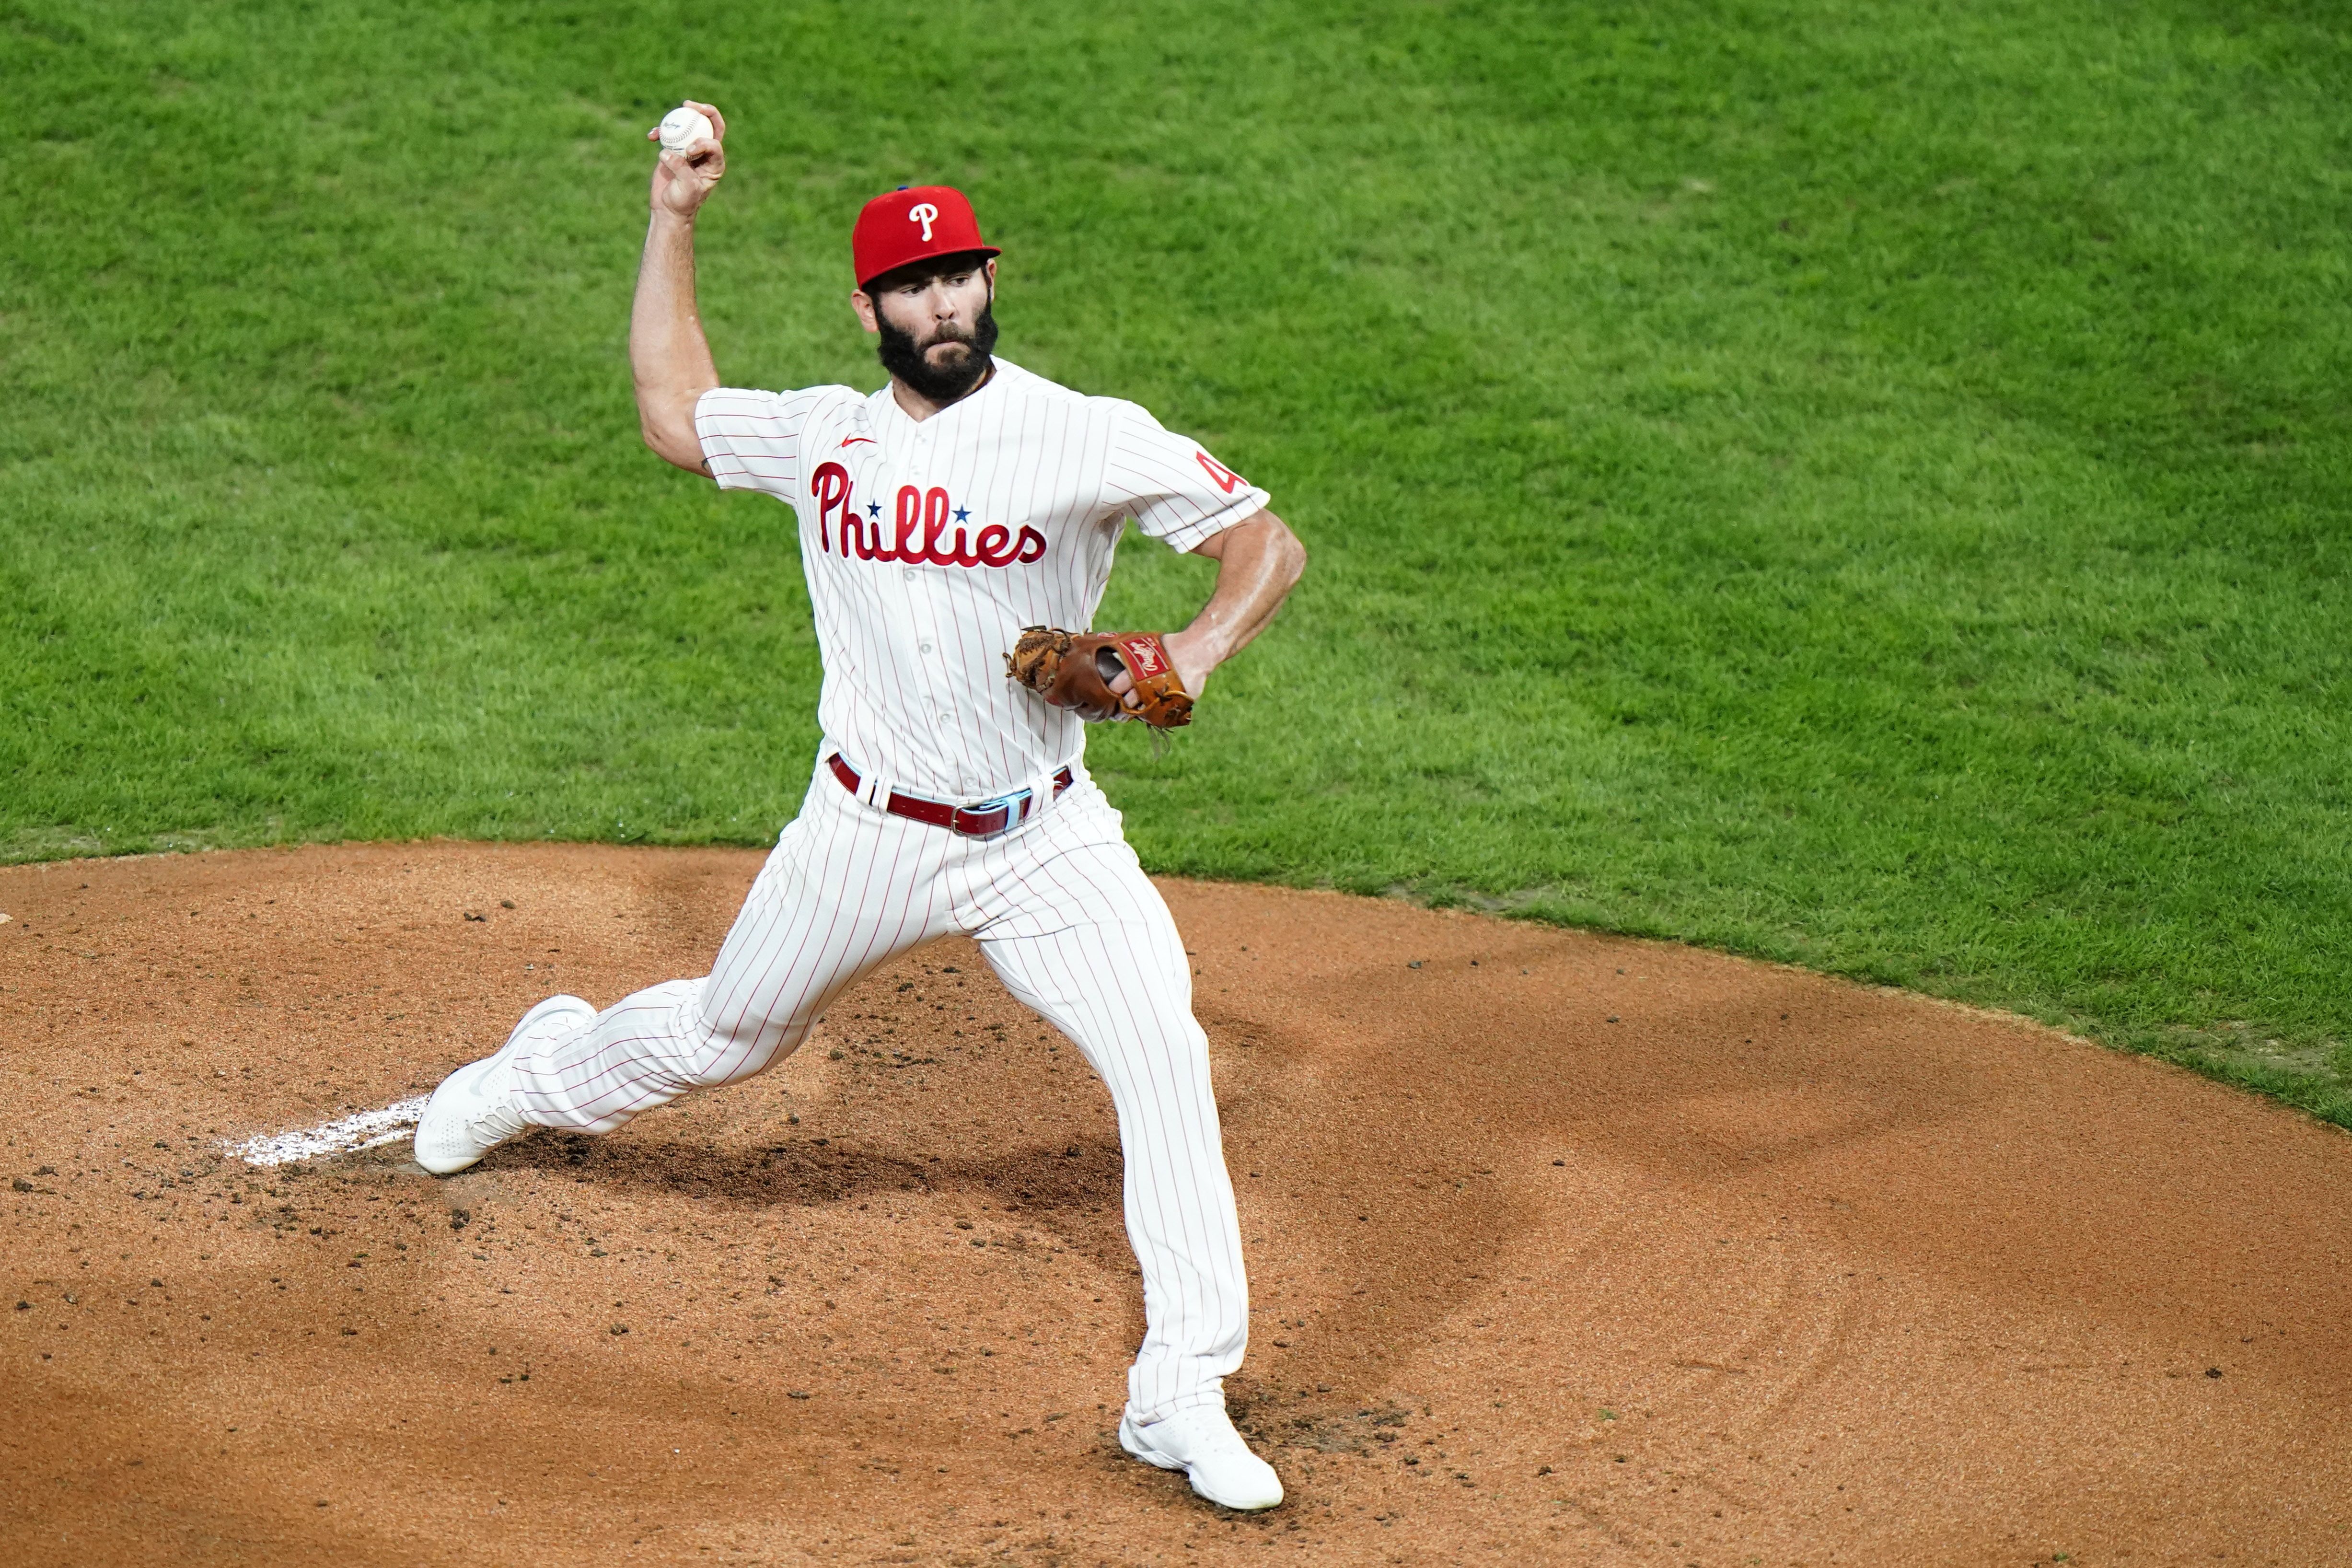 Jake Arrieta released by Cubs: Won Cy Young, World Series in Chicago